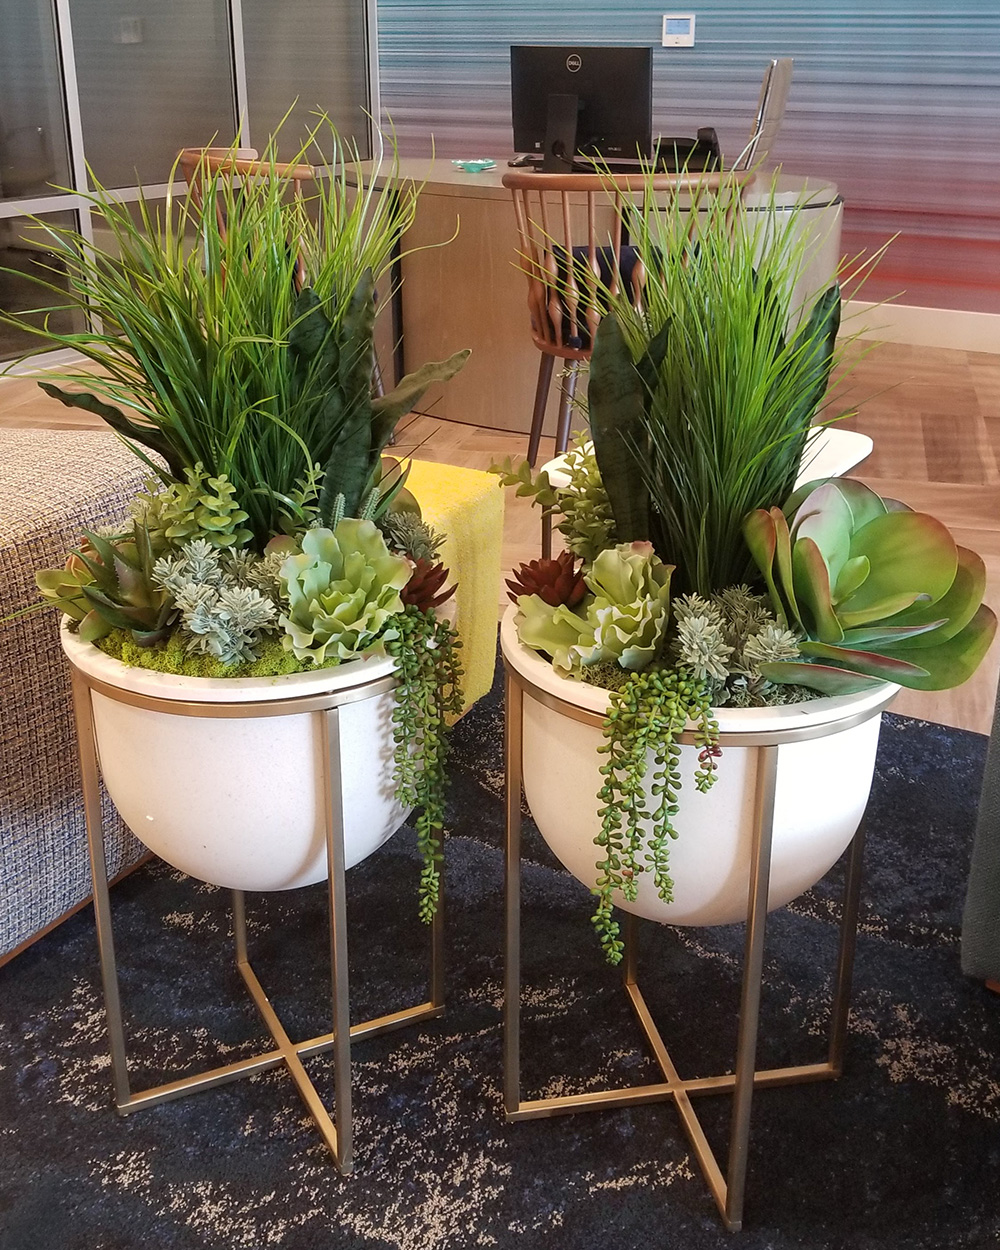 Matching potted plants in office setting